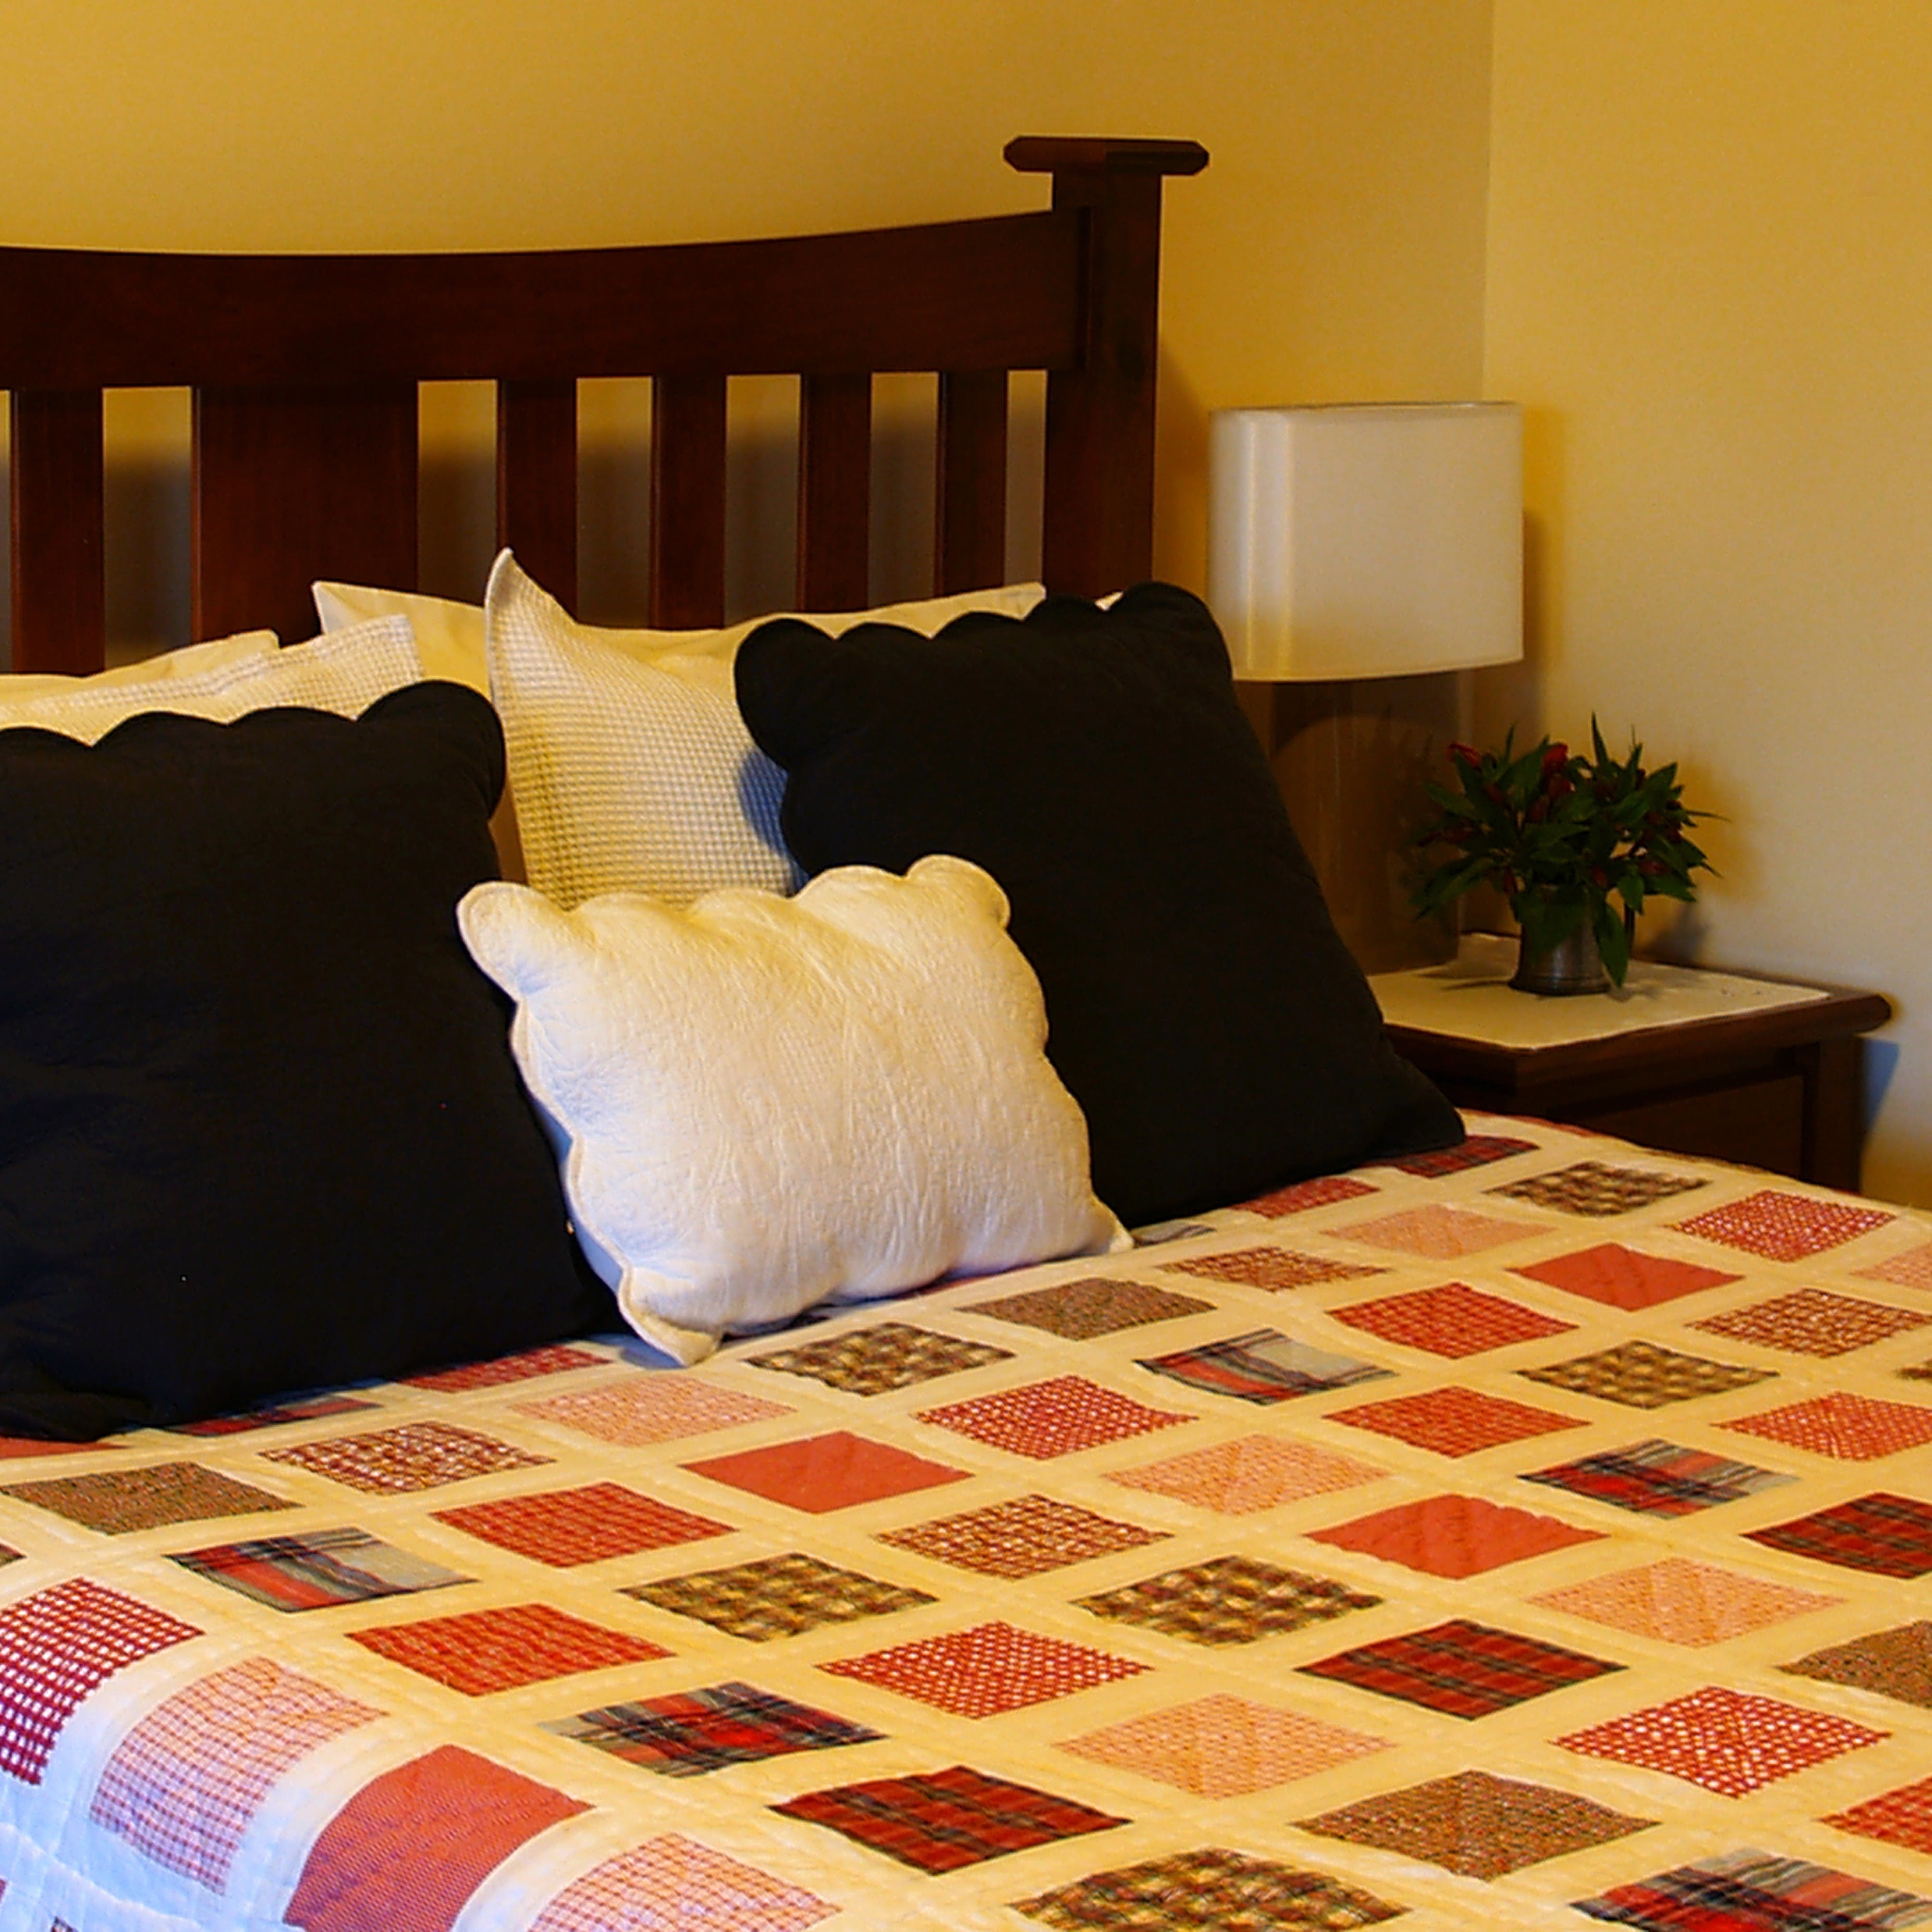 Grampians View Bed and Breakfast - Accommodation in Surfers Paradise